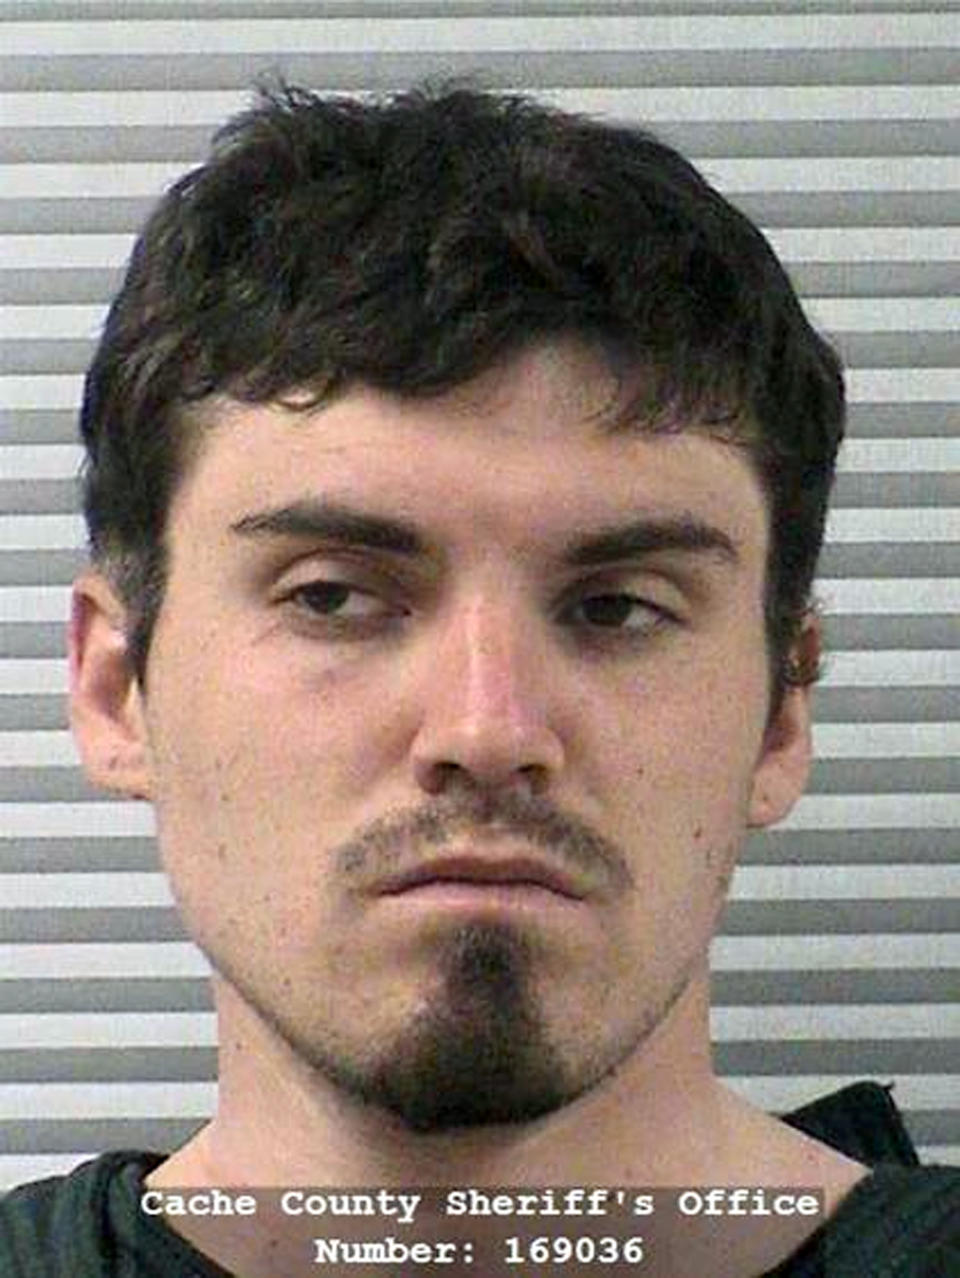 FILE - This Saturday, May 25, 2019, file photo provided by Cache County Sheriff's Office shows Alex Whipple. Police were able to quickly connect Whipple to the disappearance and death of a 5-year-old Utah girl using a new type of DNA test that can produce results within hours, authorities said. Logan police used a Rapid DNA test to link Alex Whipple to the Saturday disappearance of his niece, Elizabeth "Lizzy" Shelley, KSL-TV reported .(Cache County Sheriff's Office via AP, File)